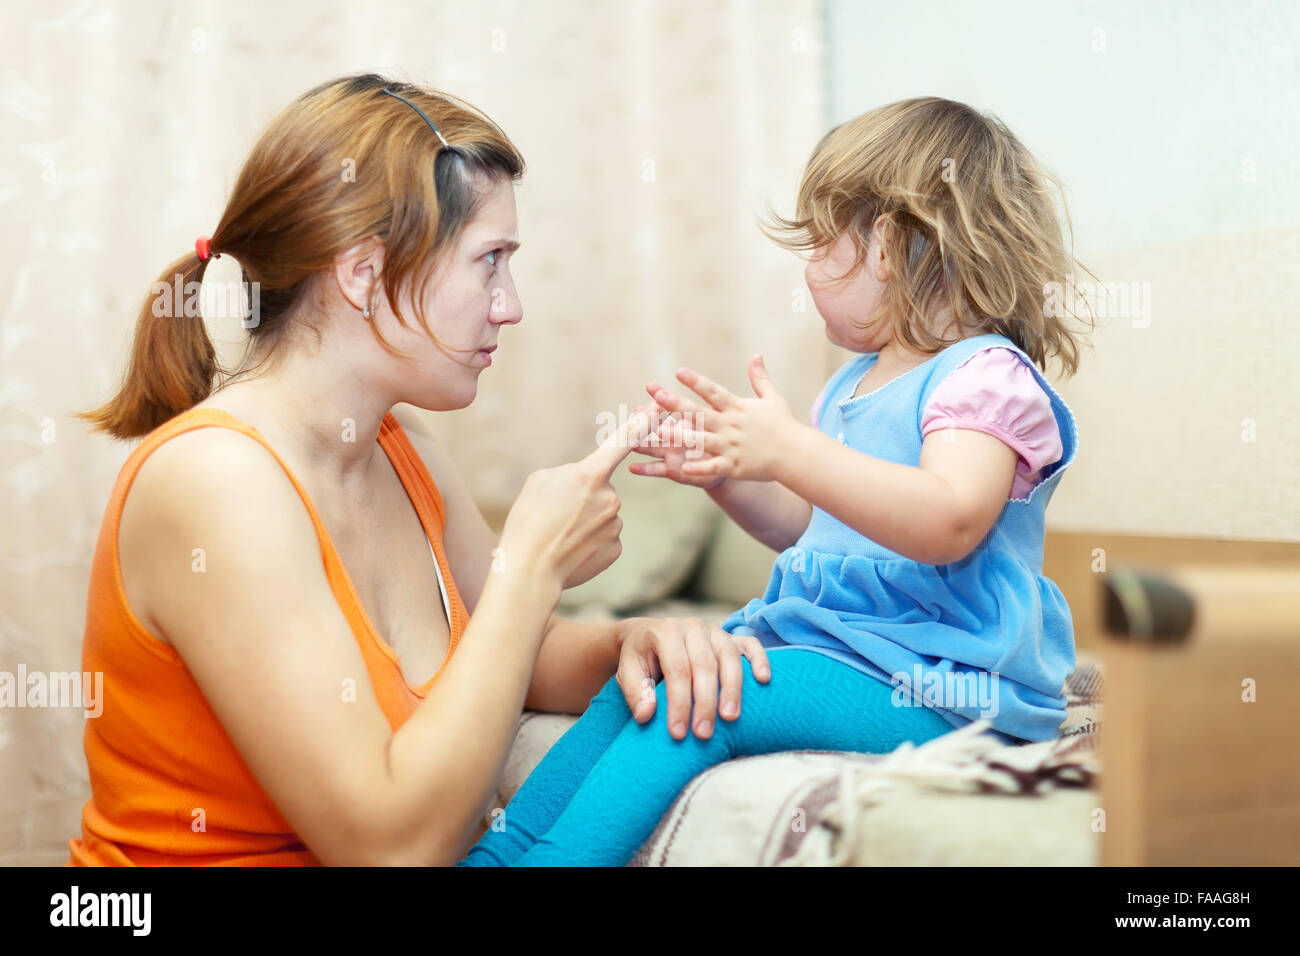 https://c8.alamy.com/comp/FAAG8H/woman-scolds-crying-child-at-home-interior-FAAG8H.jpg